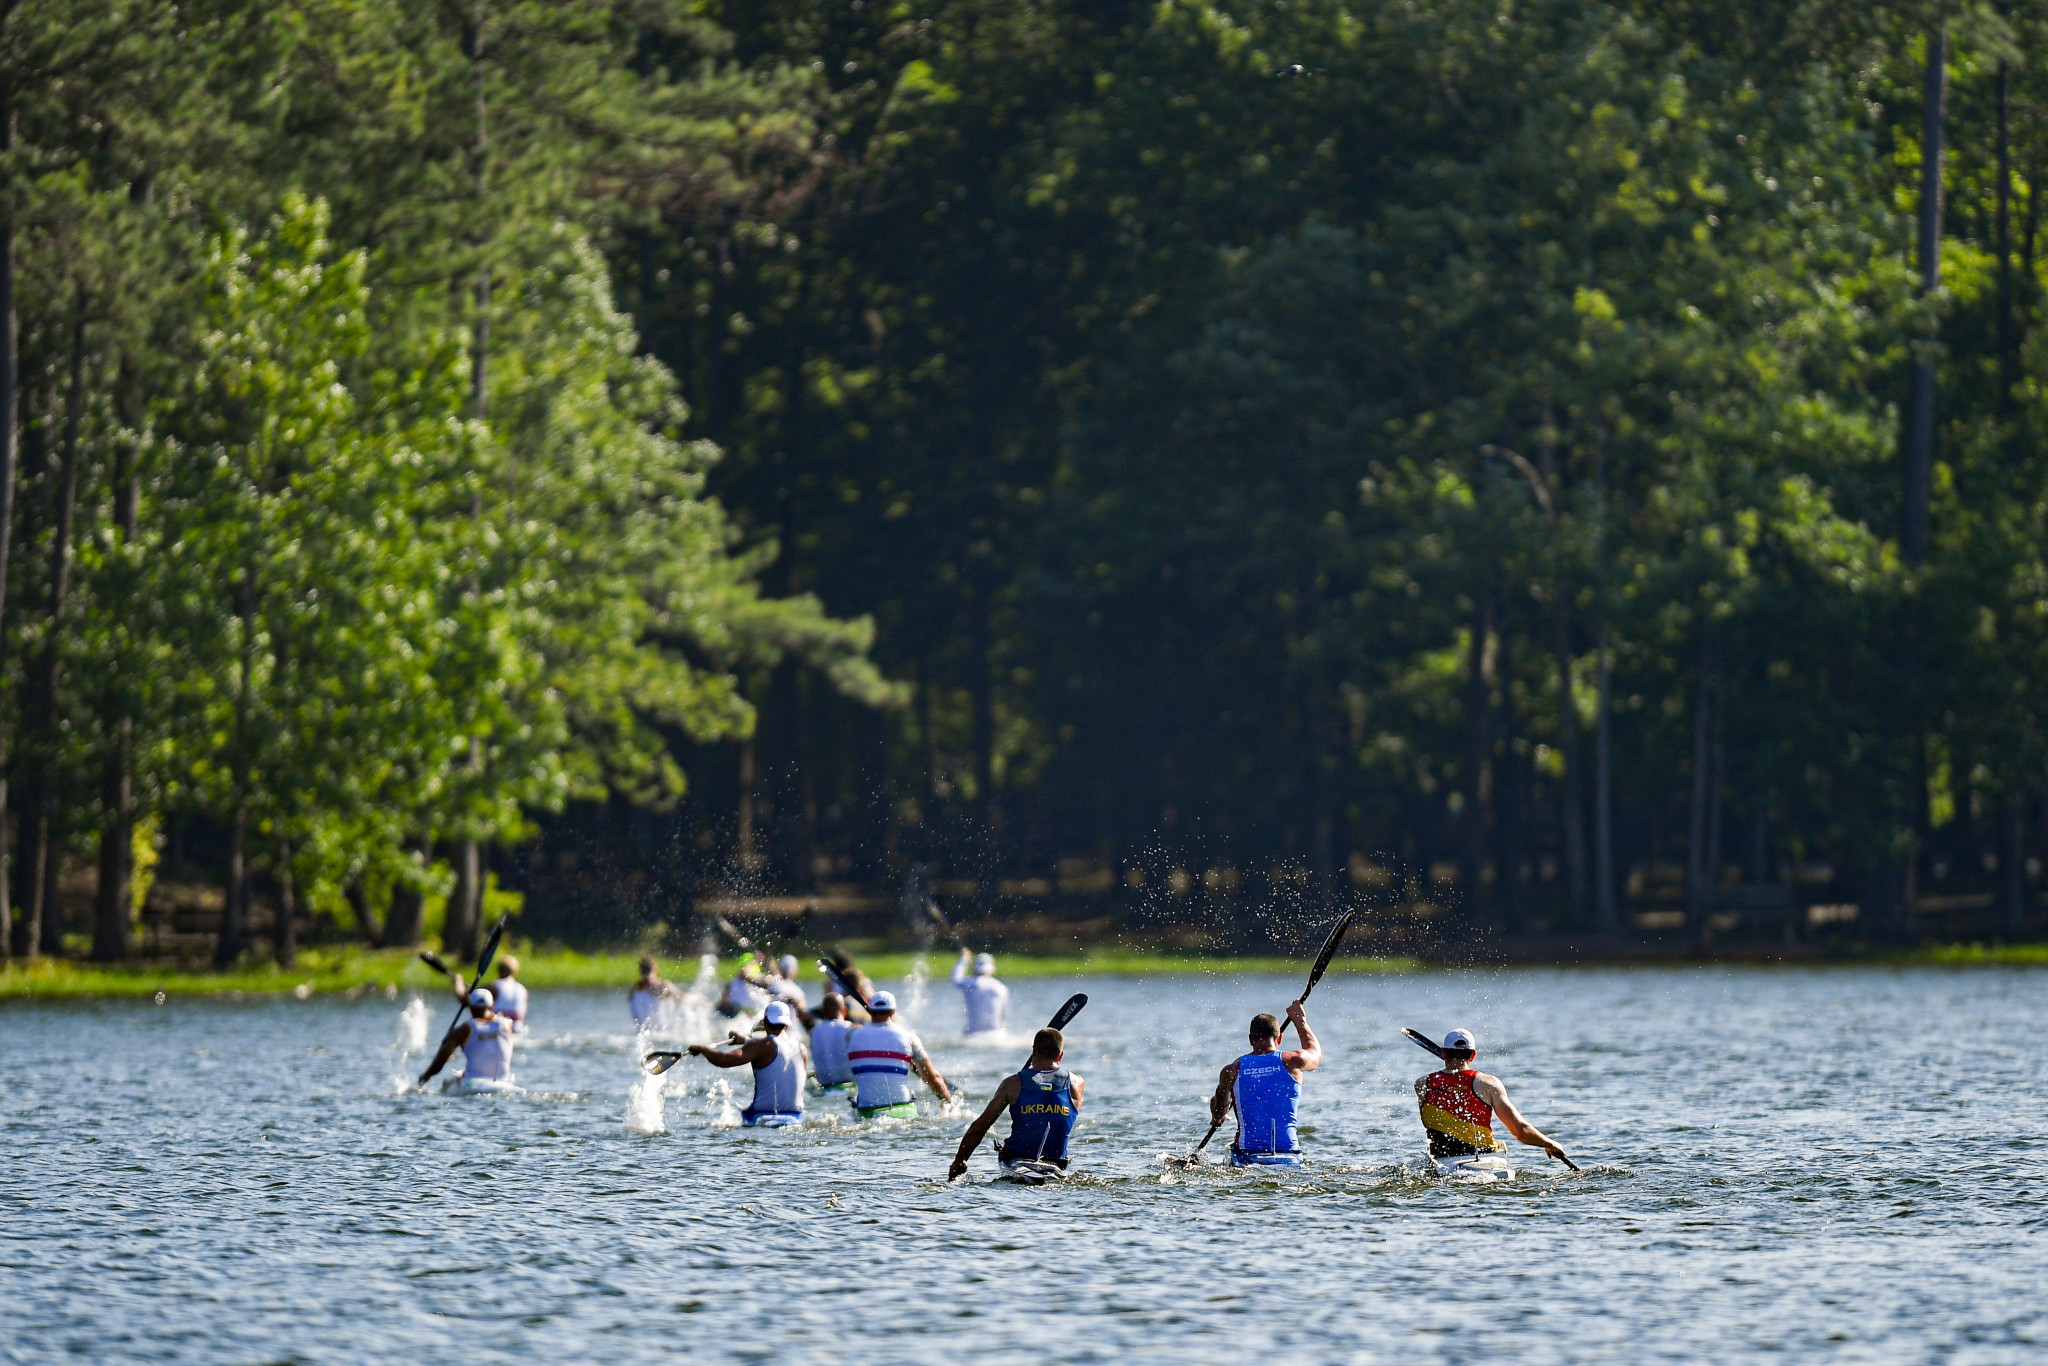 Marathon canoeists battle it out on the waters at Oak Mountain State Park ©The World Games 2022